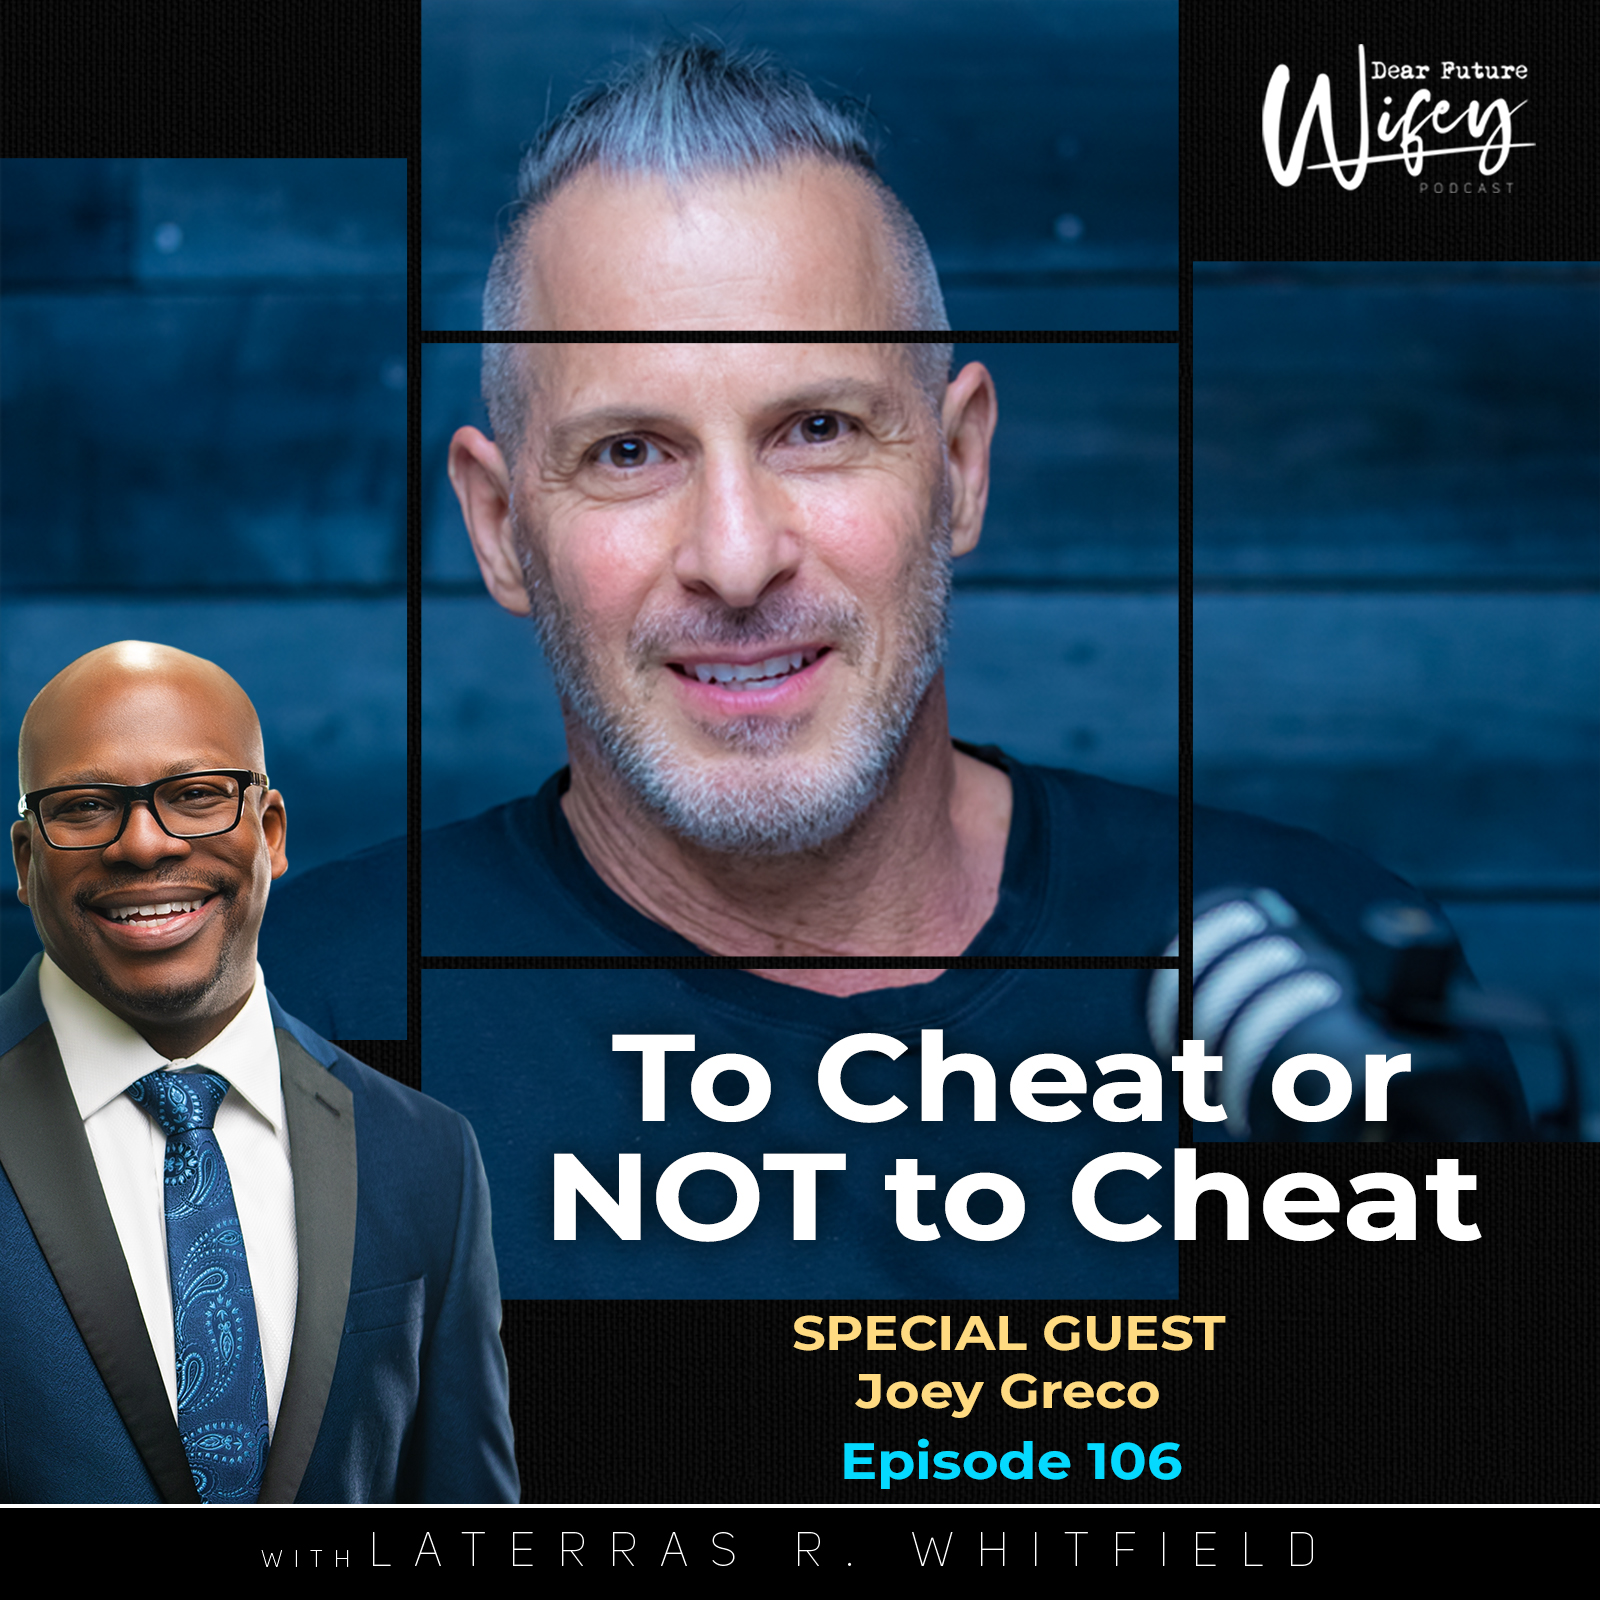 To Cheat or NOT to Cheat (Guest: Joey Greco)